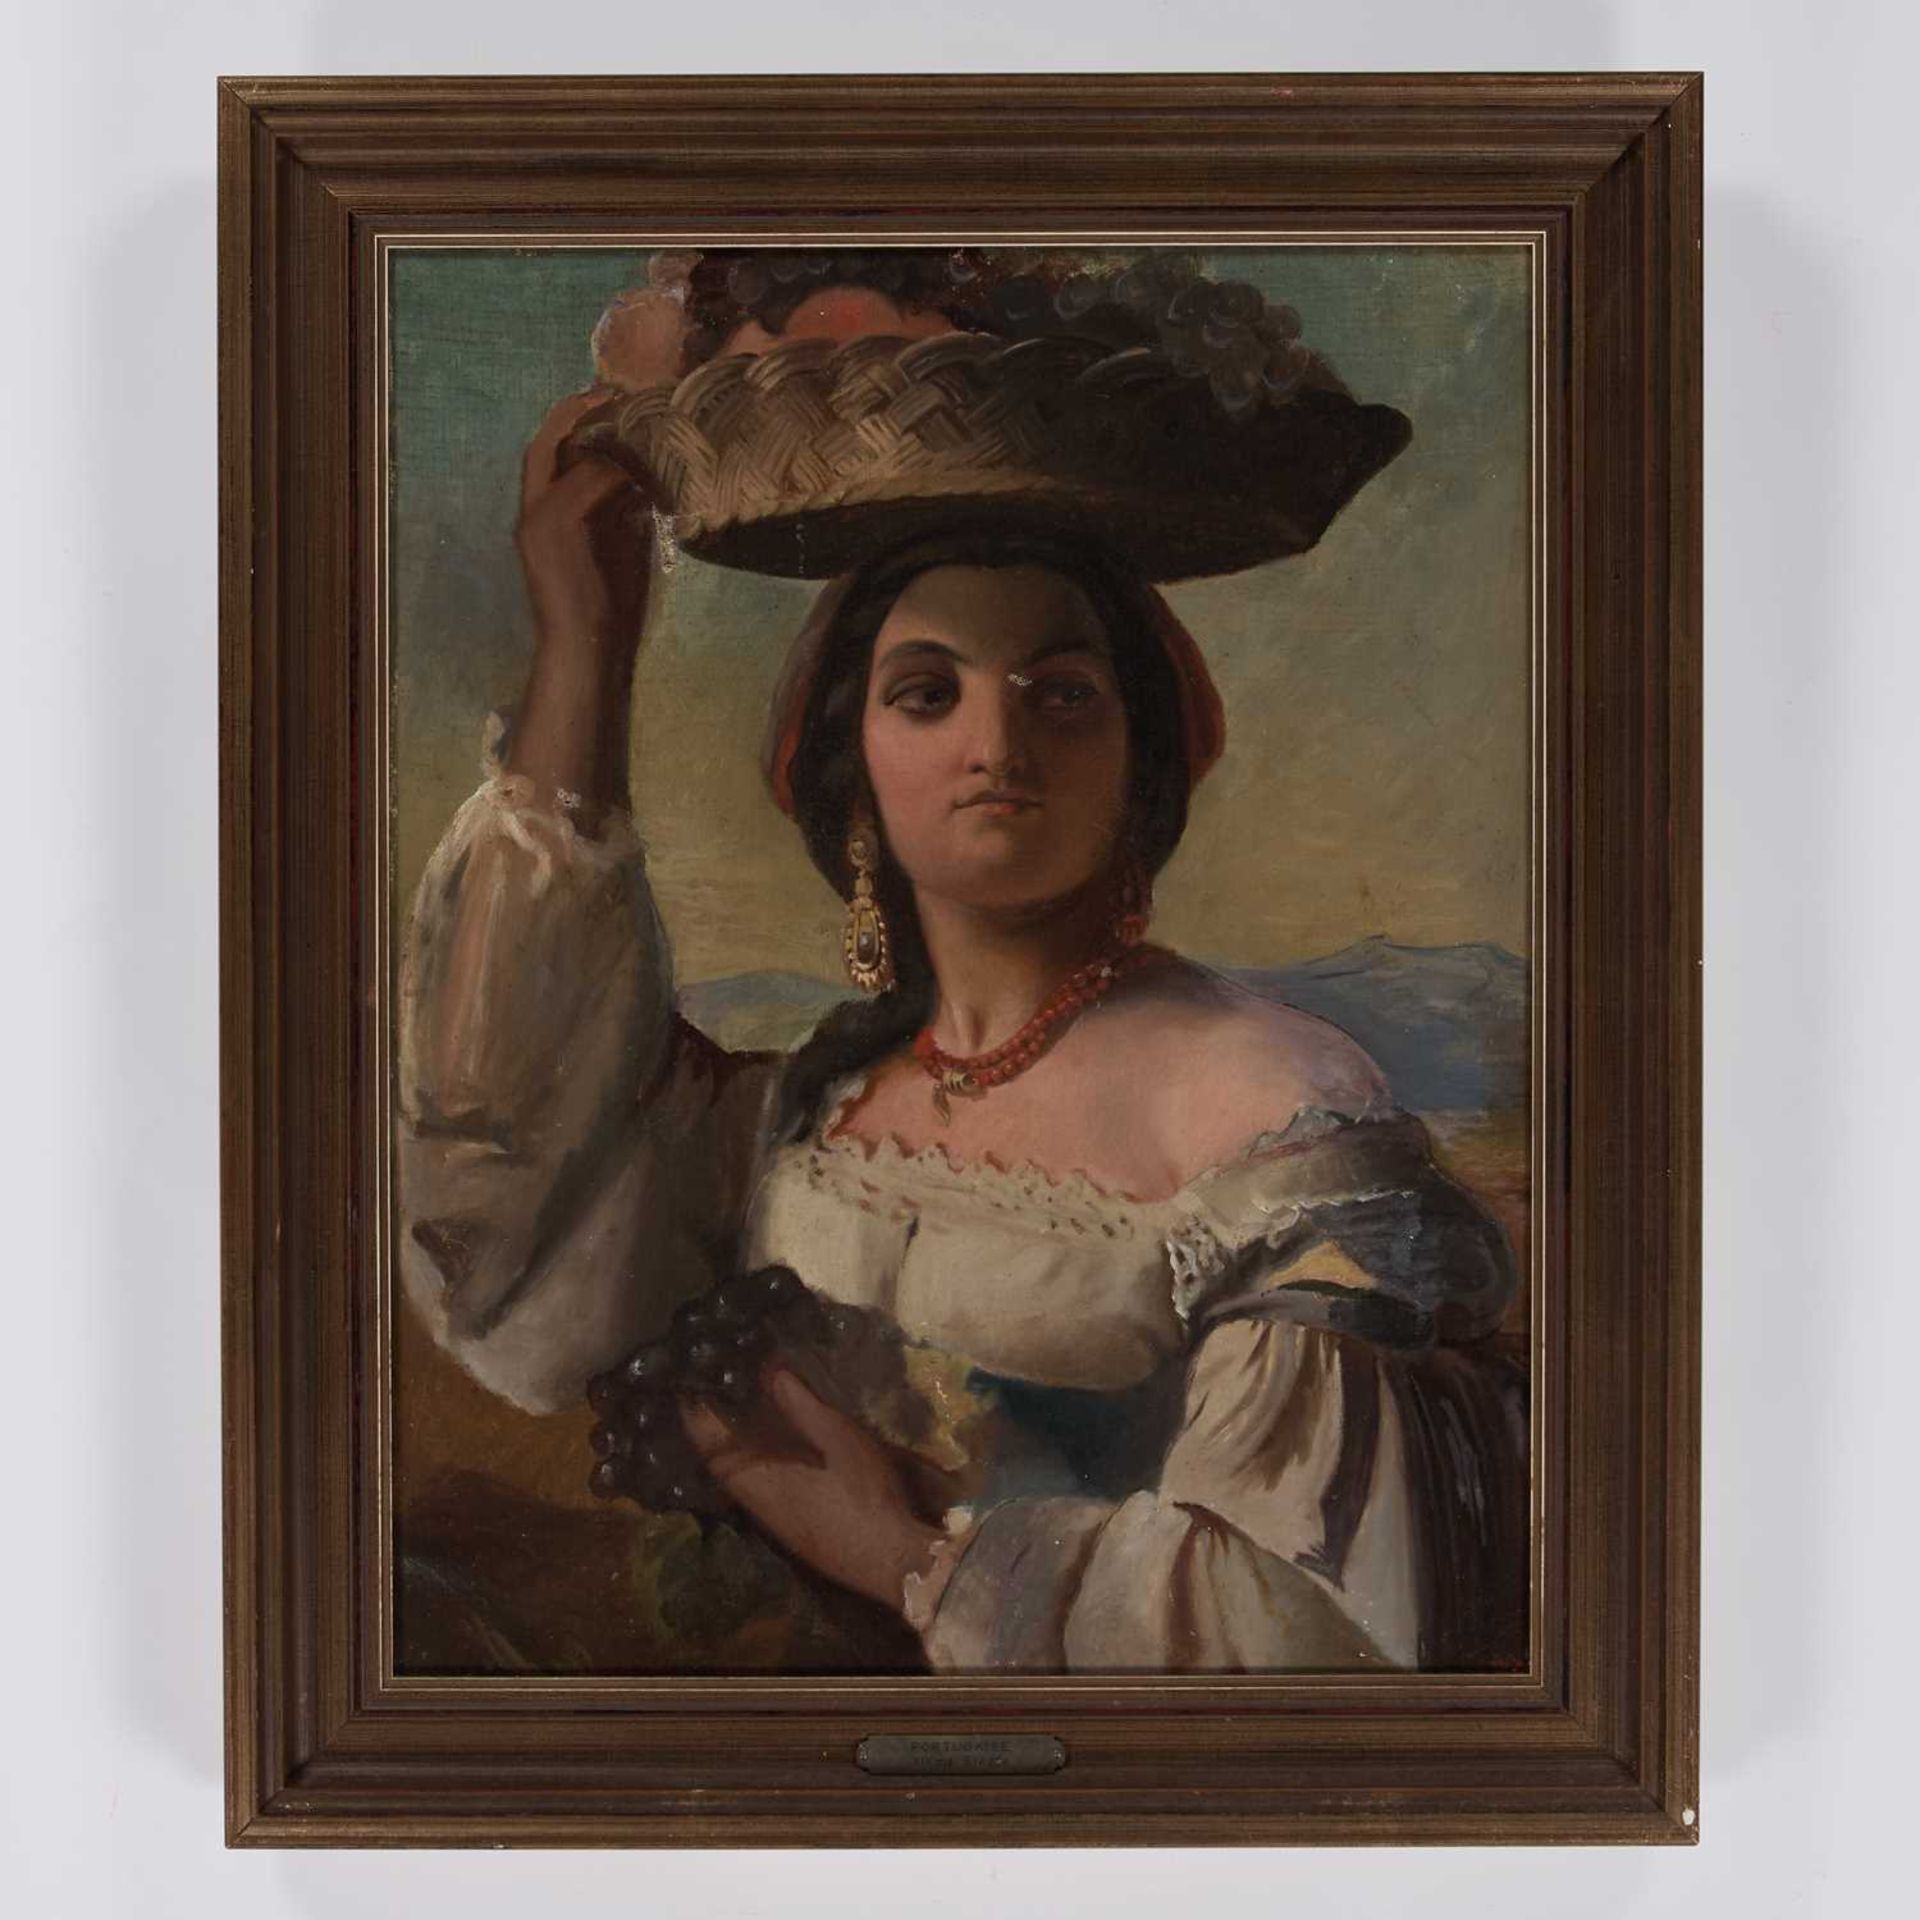 LATE 19TH CENTURY PORTUGUESE SCHOOL PORTRAIT OF A LADY WITH A BASKET OF FRUIT - Image 2 of 3